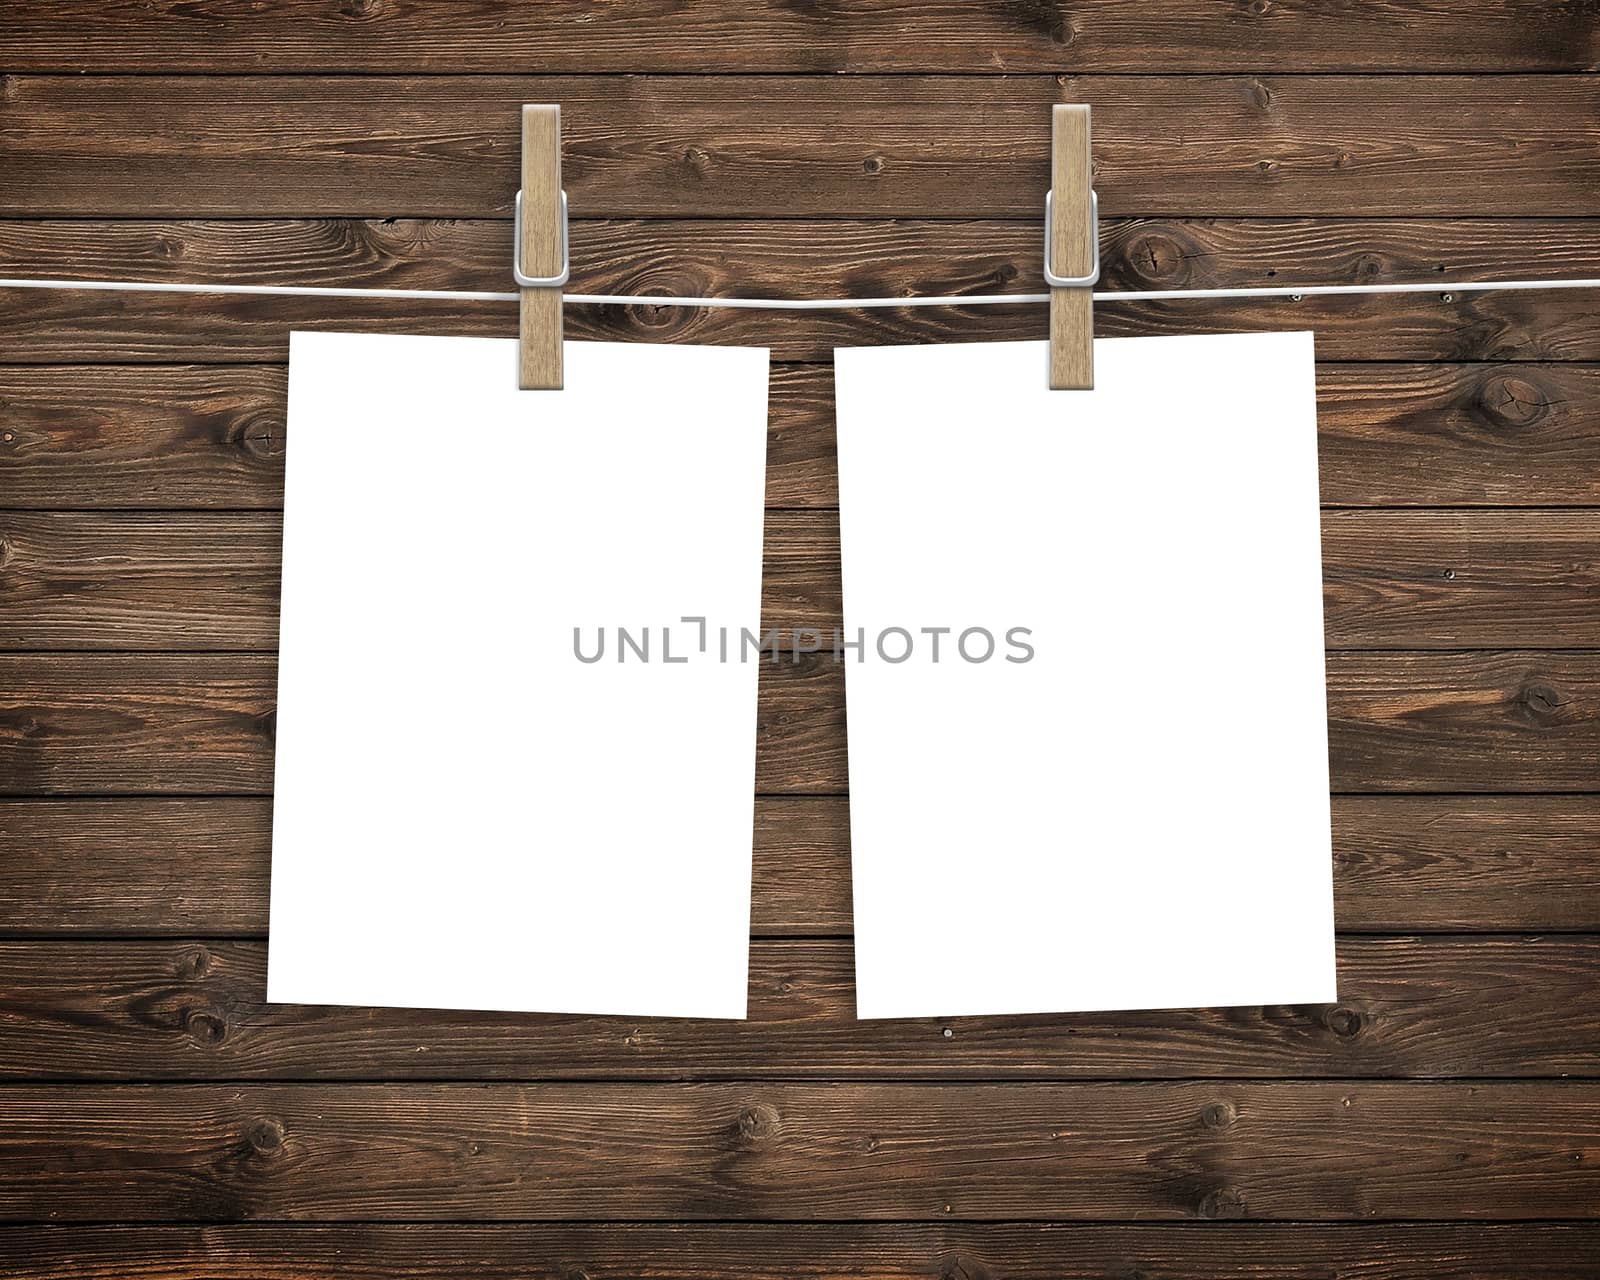 Paper cards hanging on a clothesline with clothespins on wood background by boys1983@mail.ru